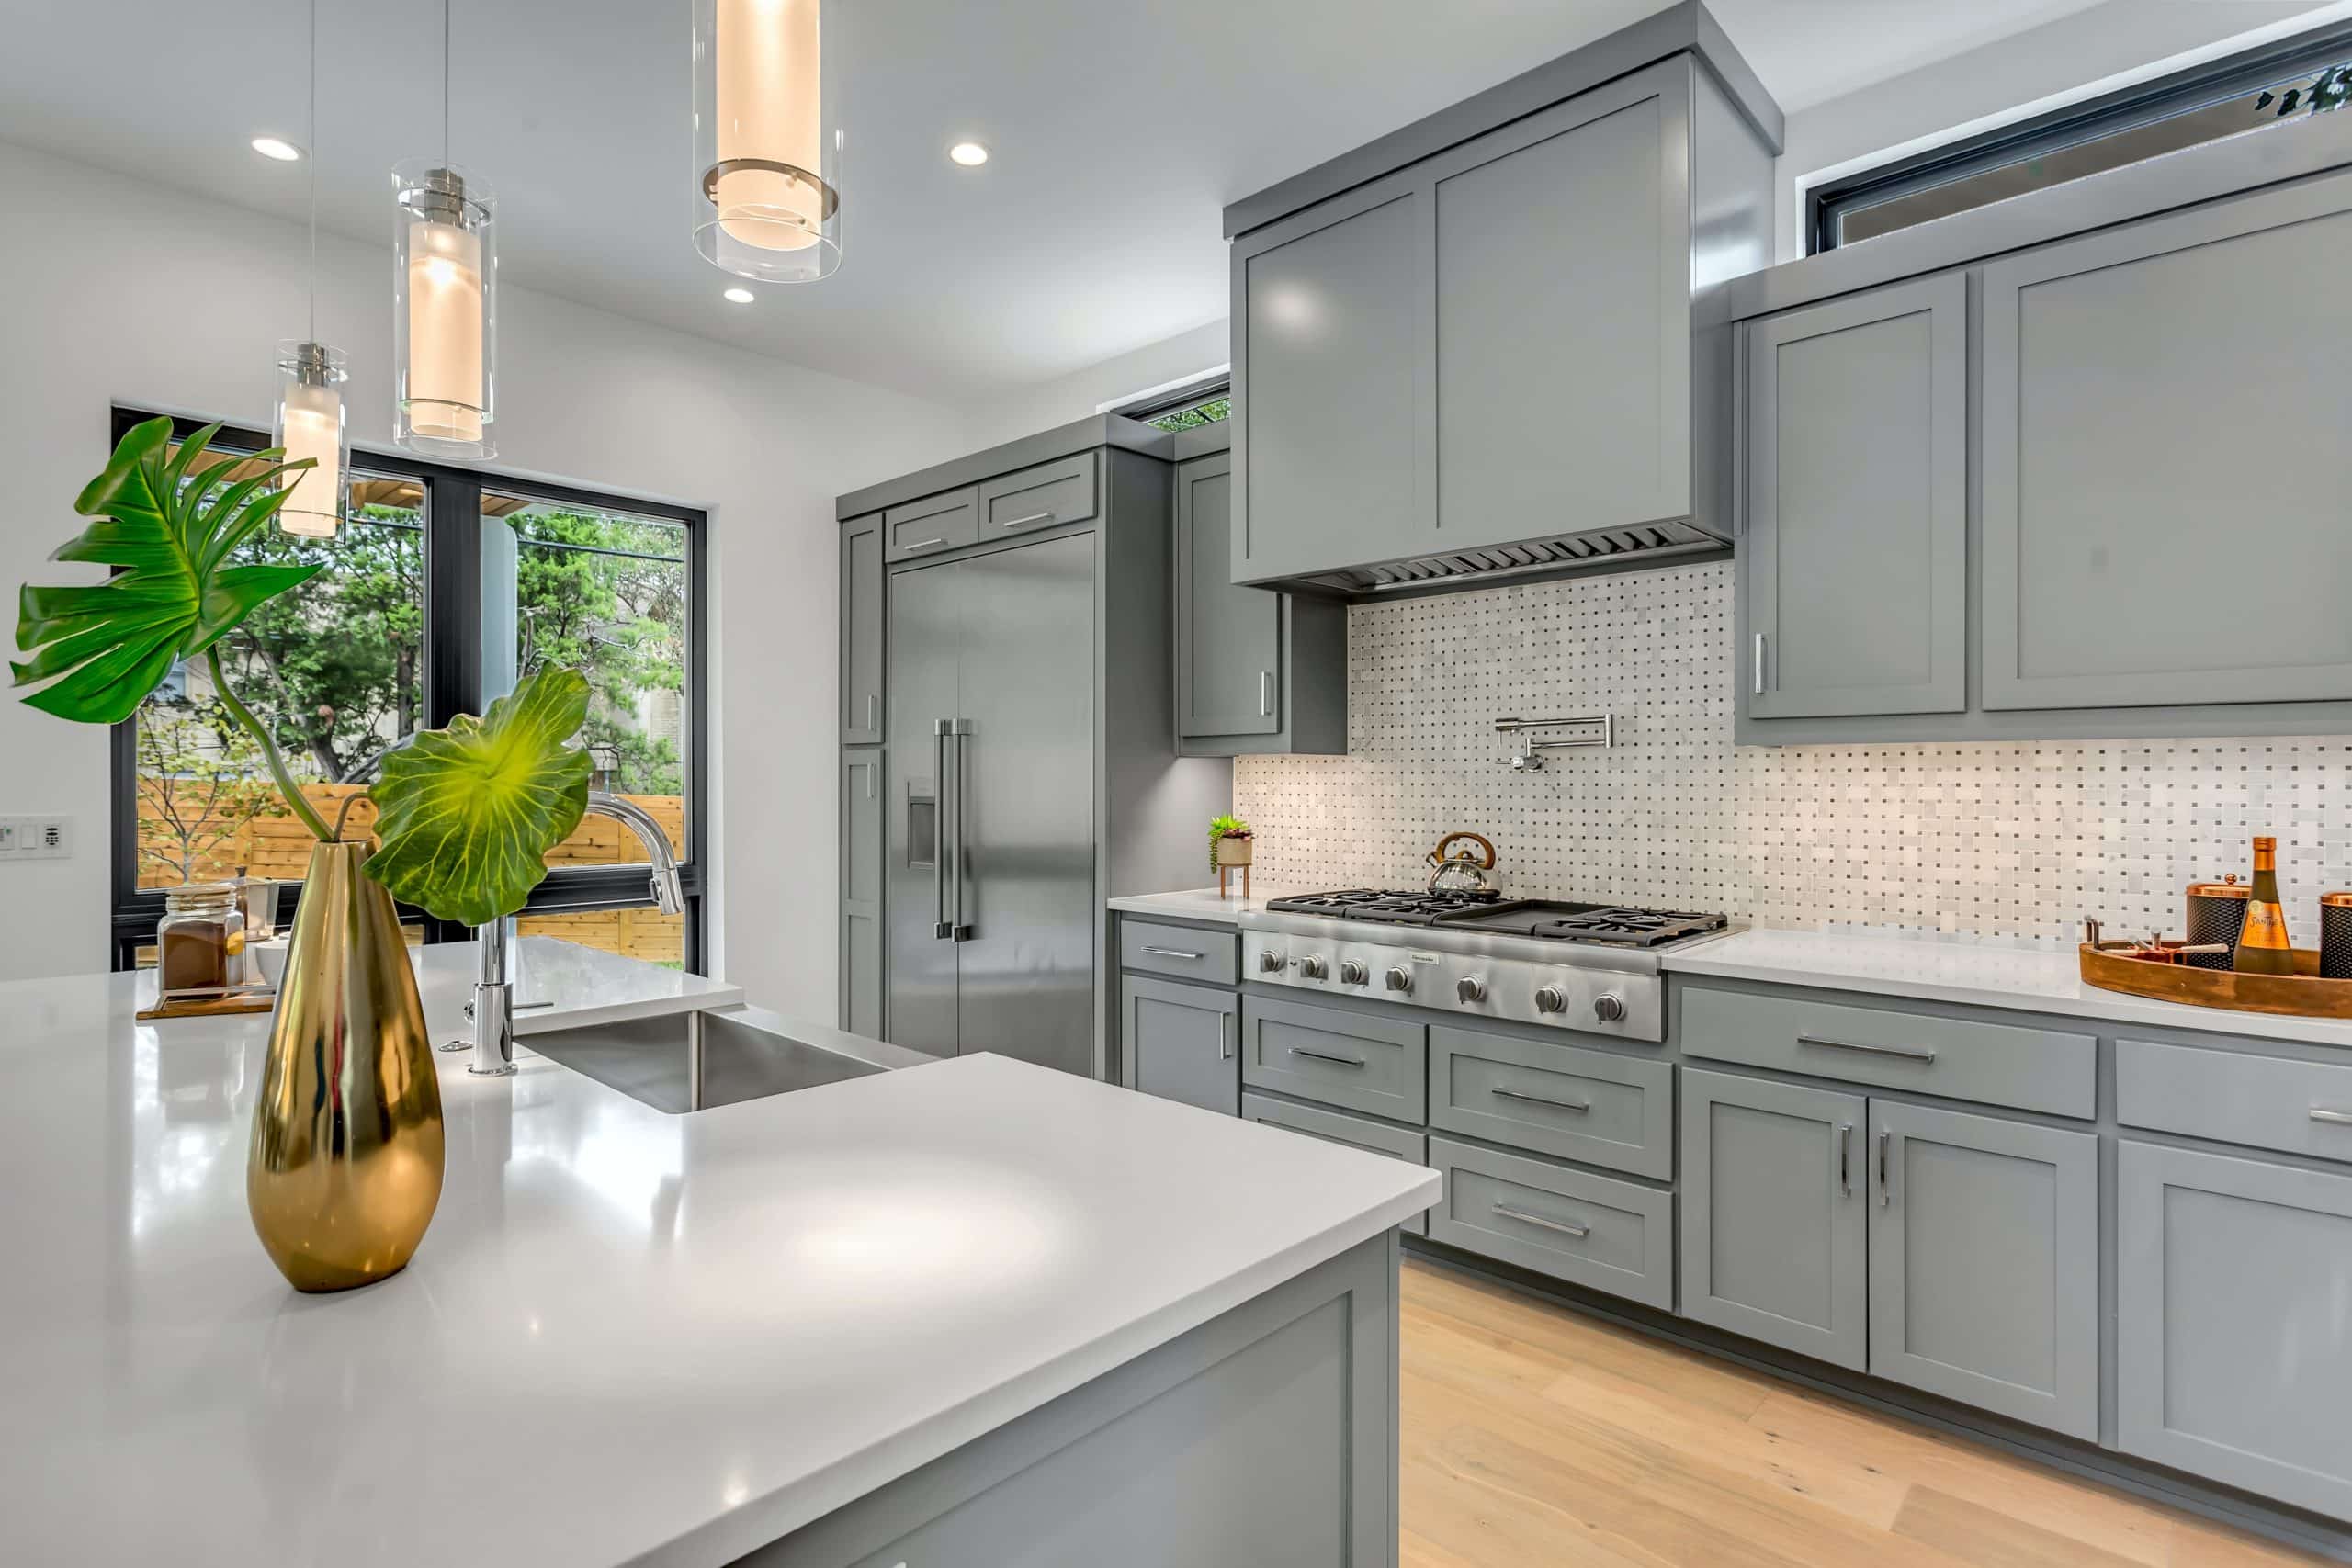 Choosing the Right Color for Your New Kitchen Cabinets